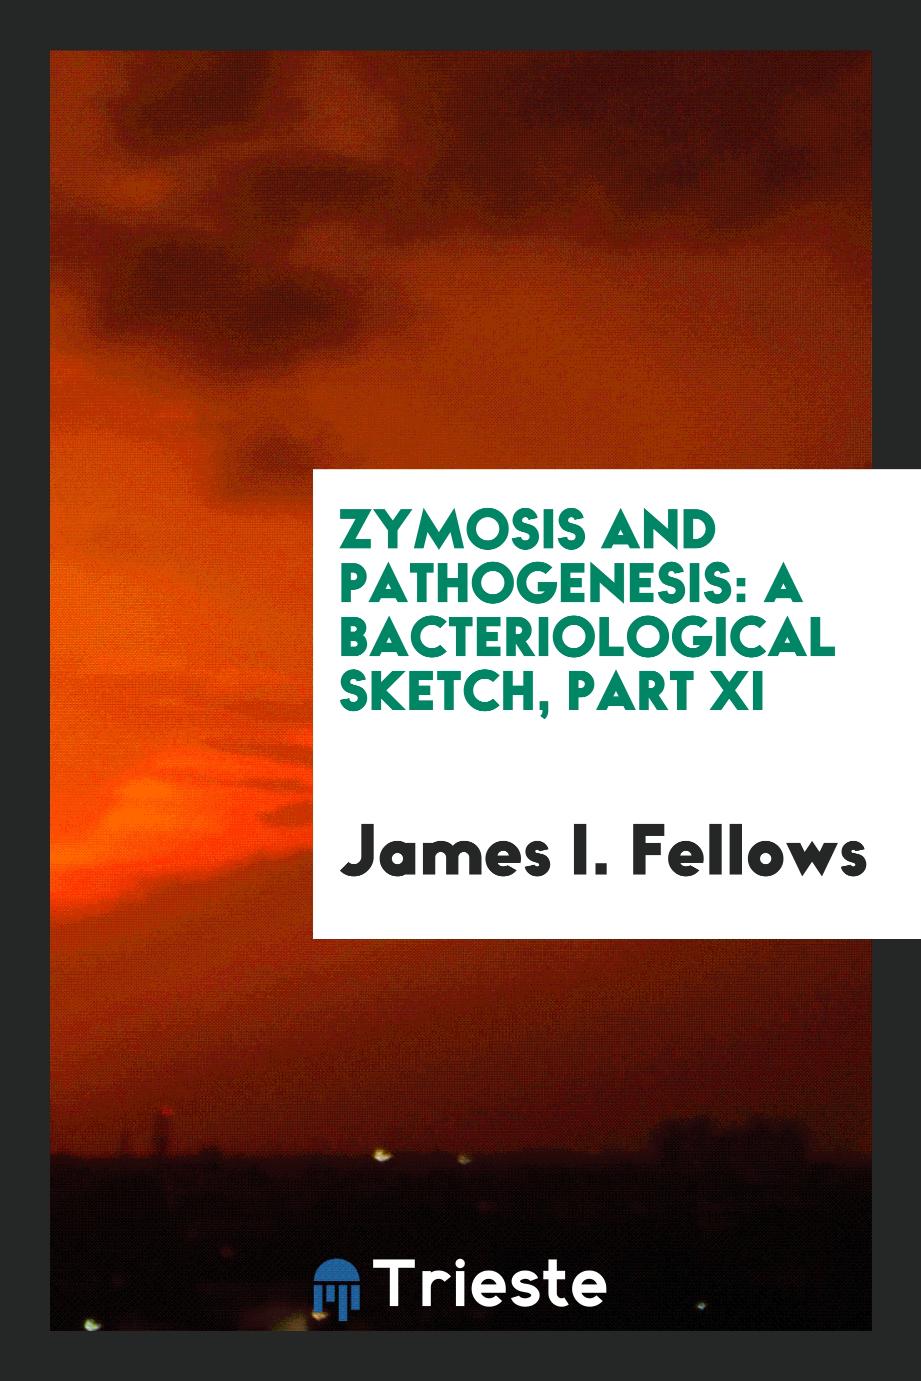 Zymosis and Pathogenesis: A Bacteriological Sketch, Part XI